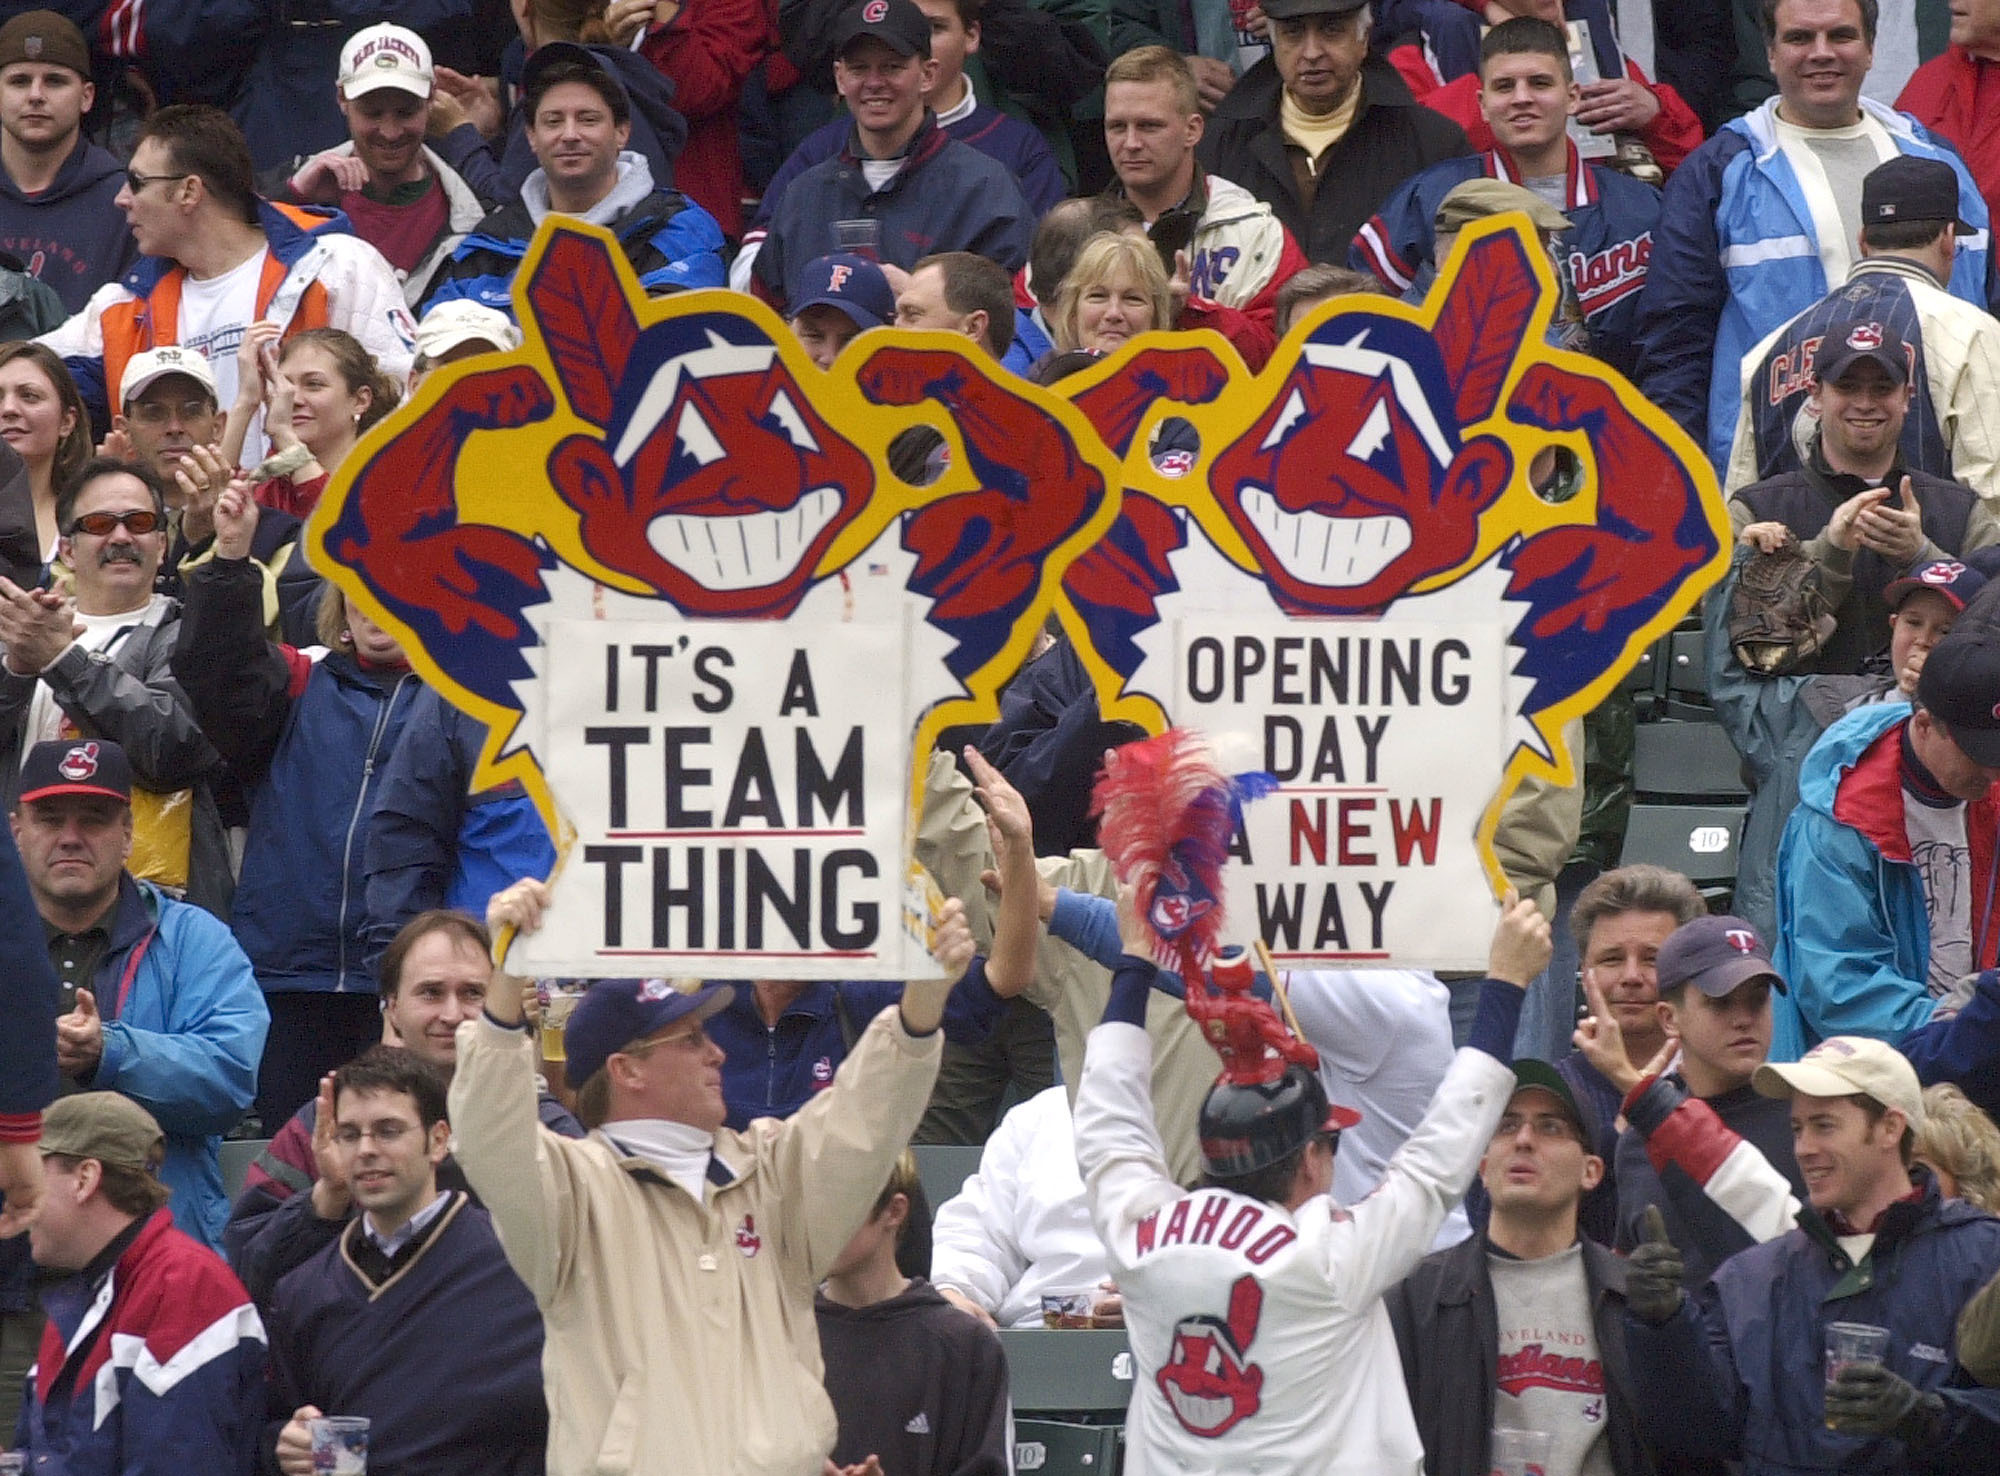 Cleveland Indians Forever Our Tribe Thanks For The Memories T